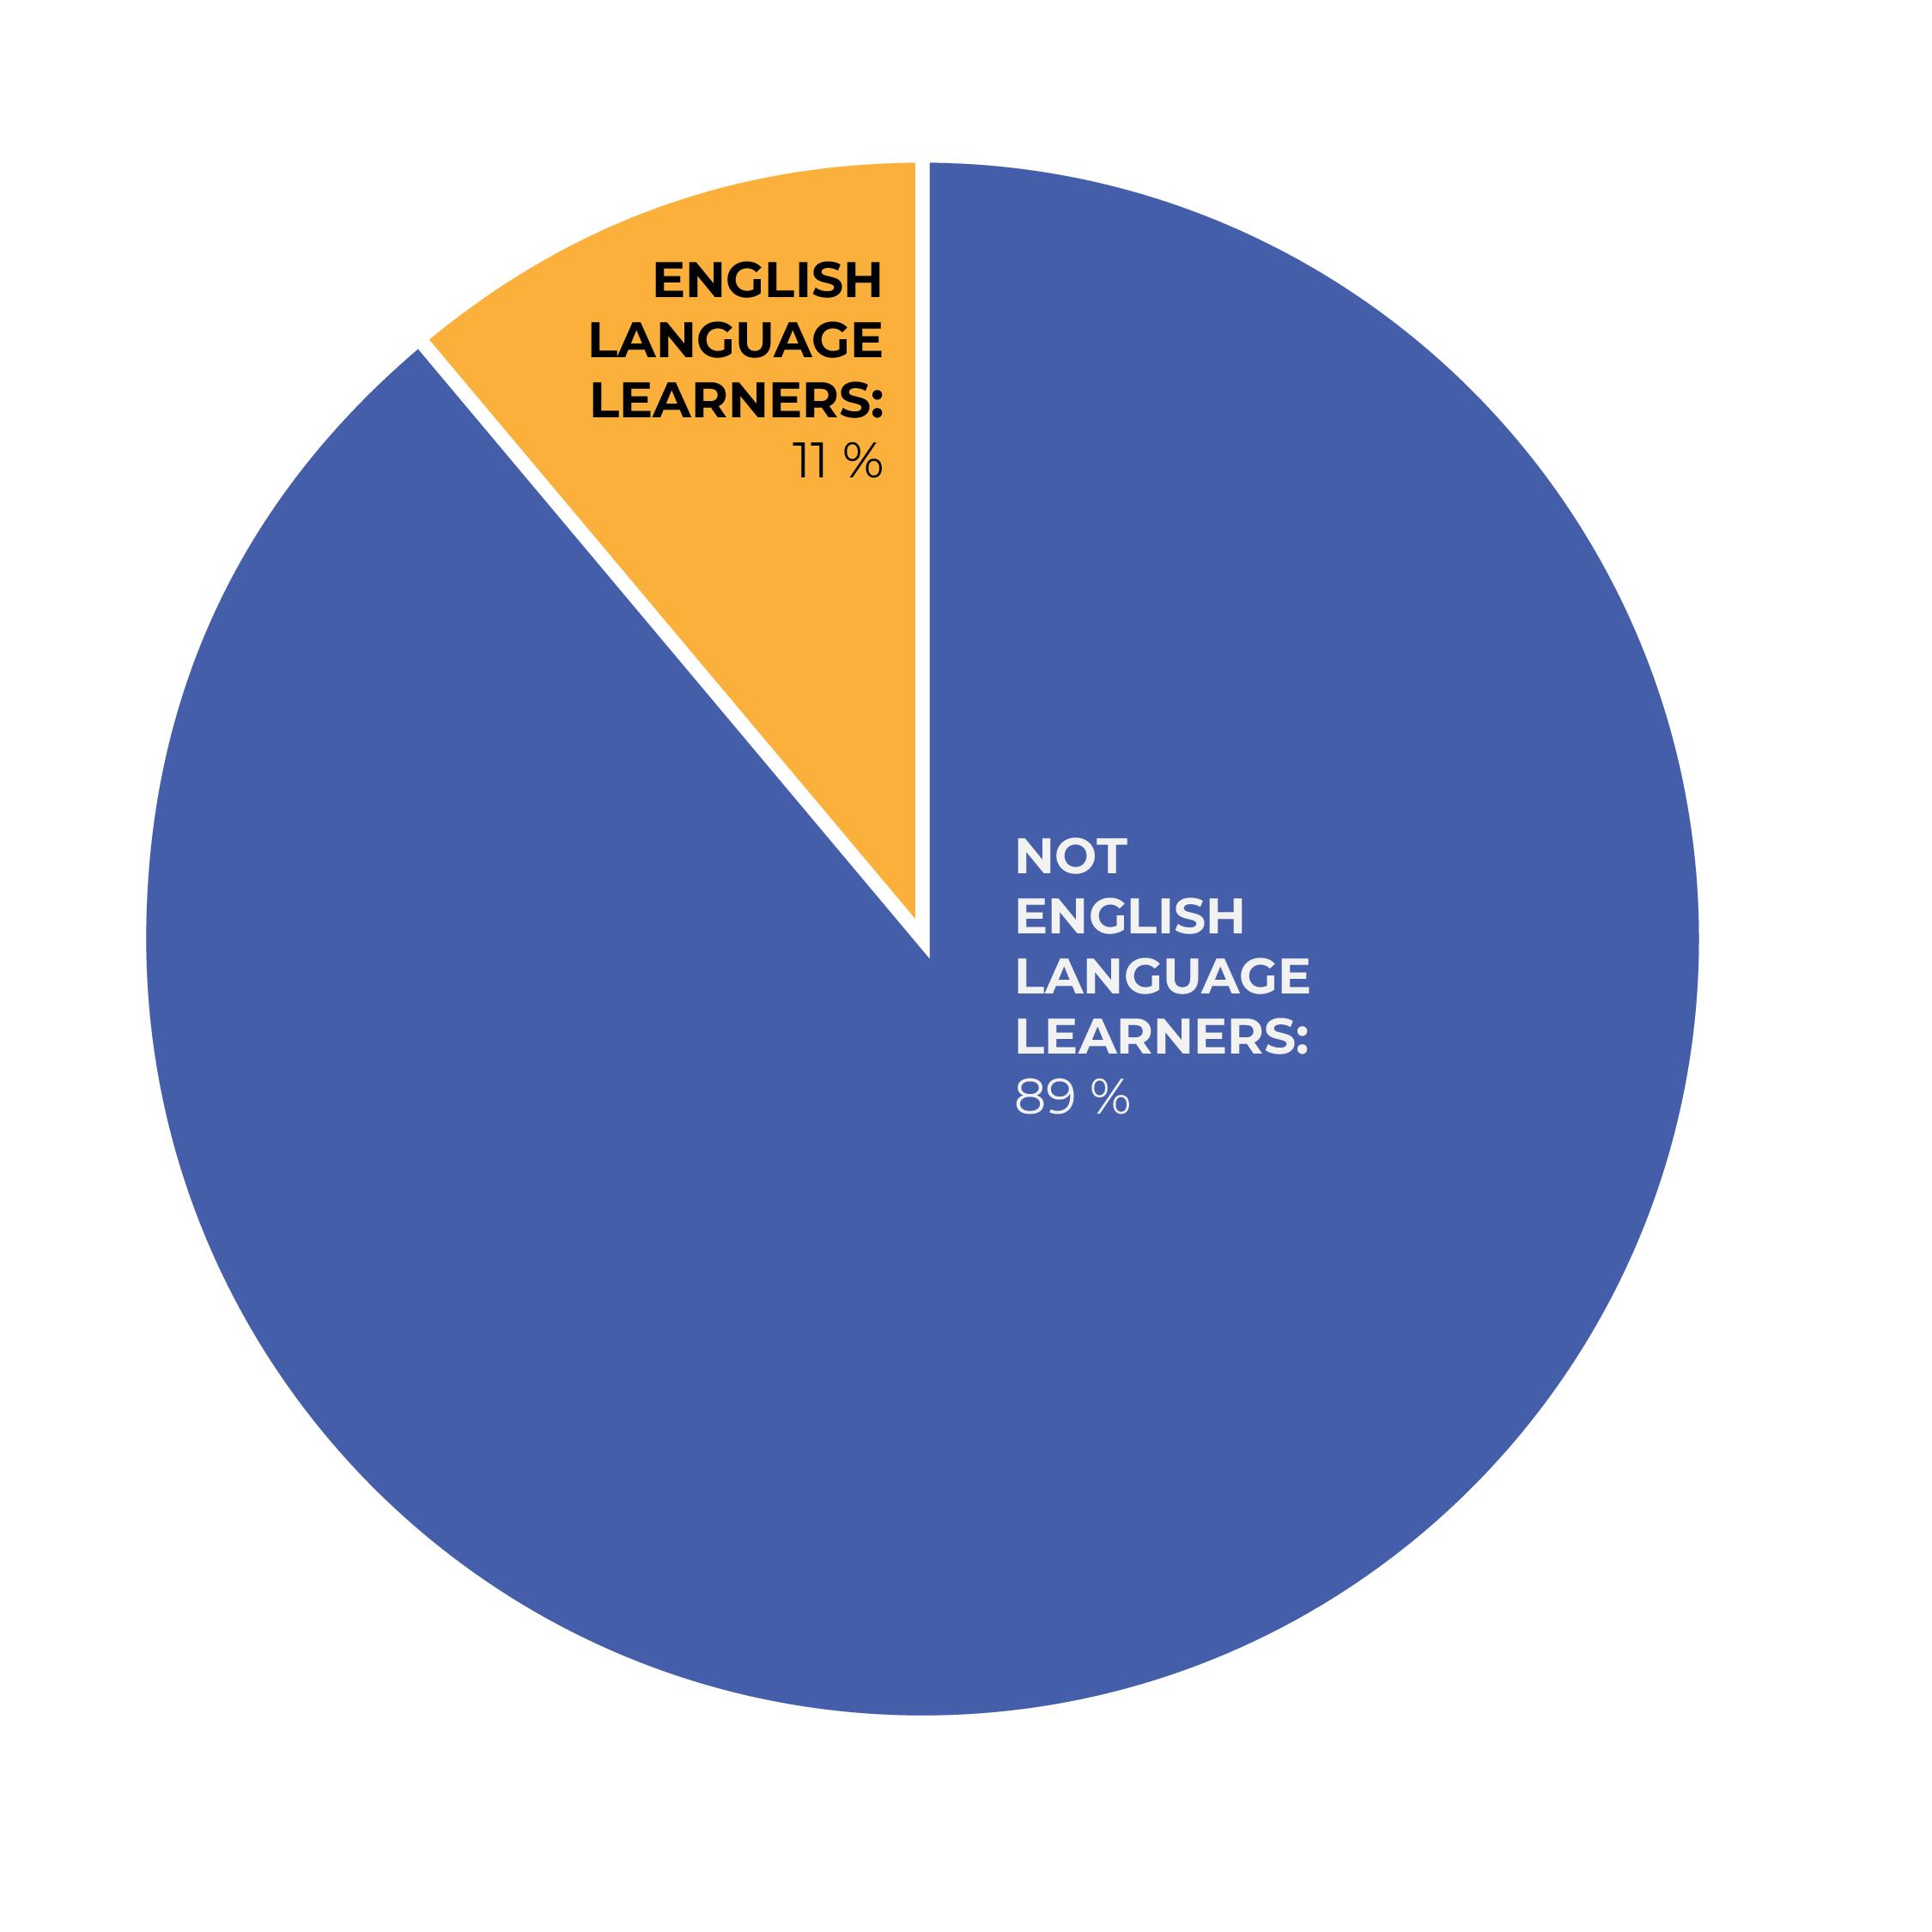 Pie chart showing breakdown of English Language Learners in the district